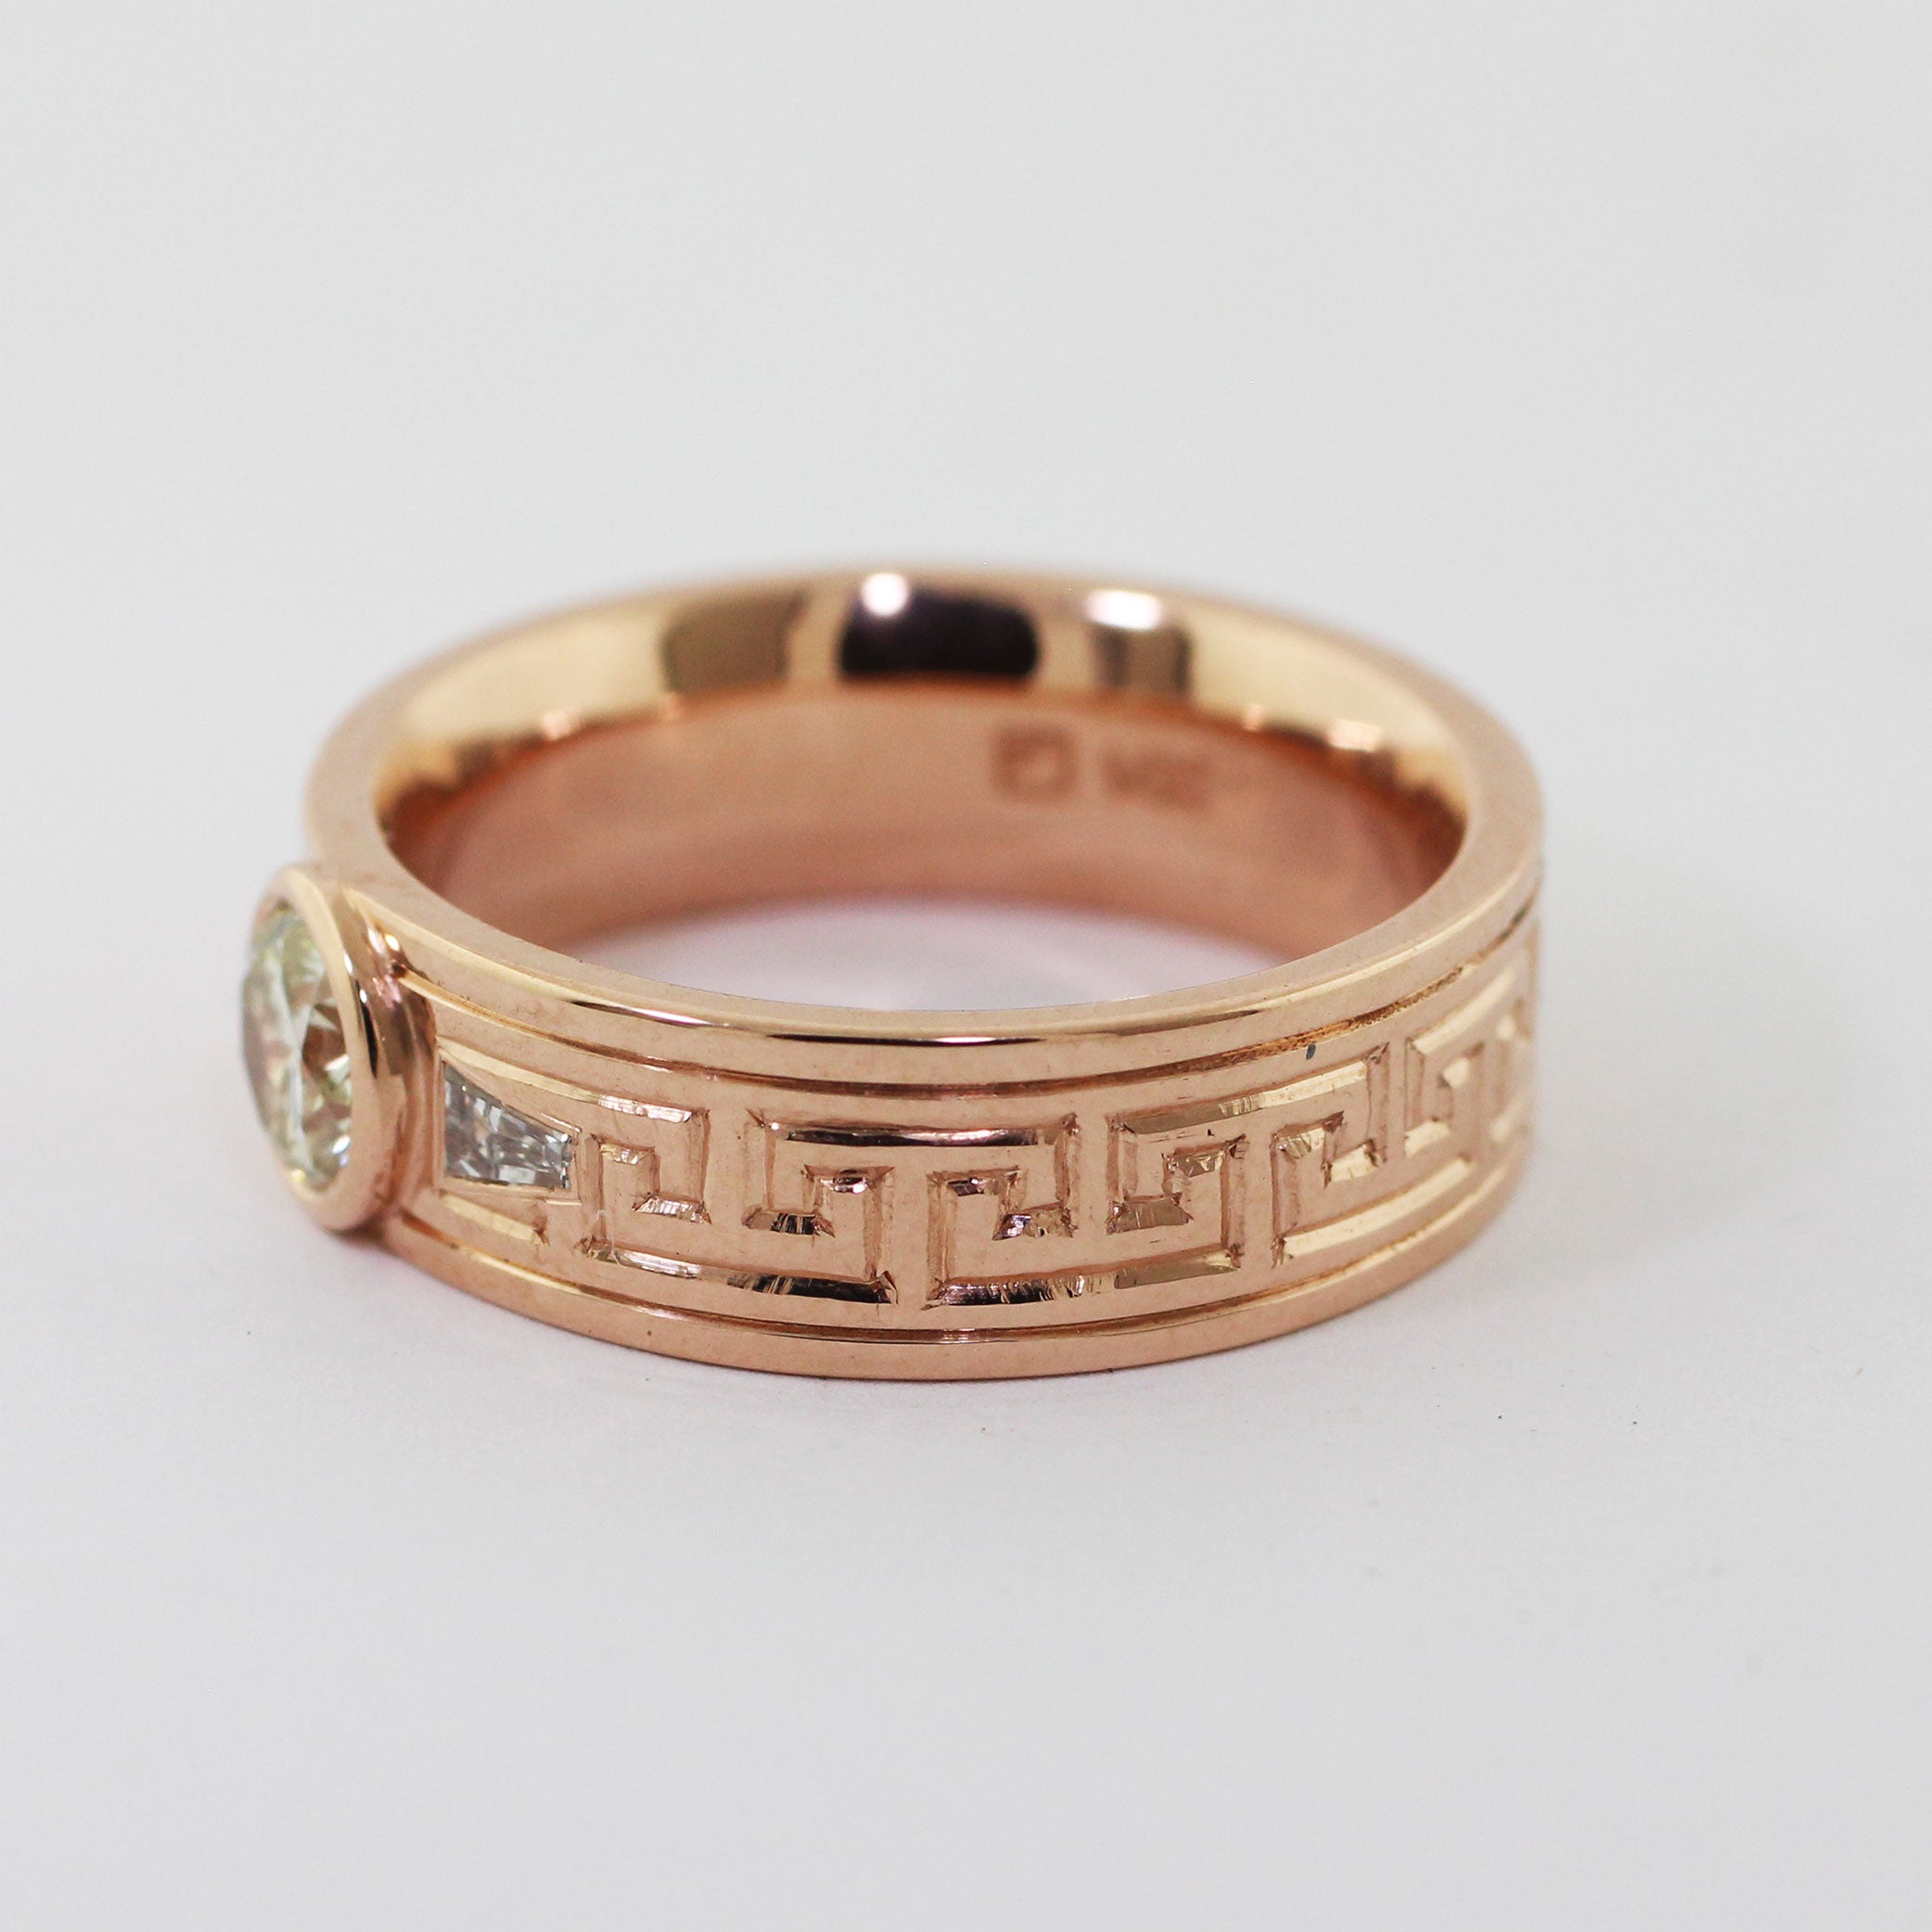 Crafted from 14kr gold and utilizing heirloom diamonds this custom men's ring features a timeless Greek key pattern expertly engraved on the exterior. Two tapered baguettes are set on either side of the center diamond.